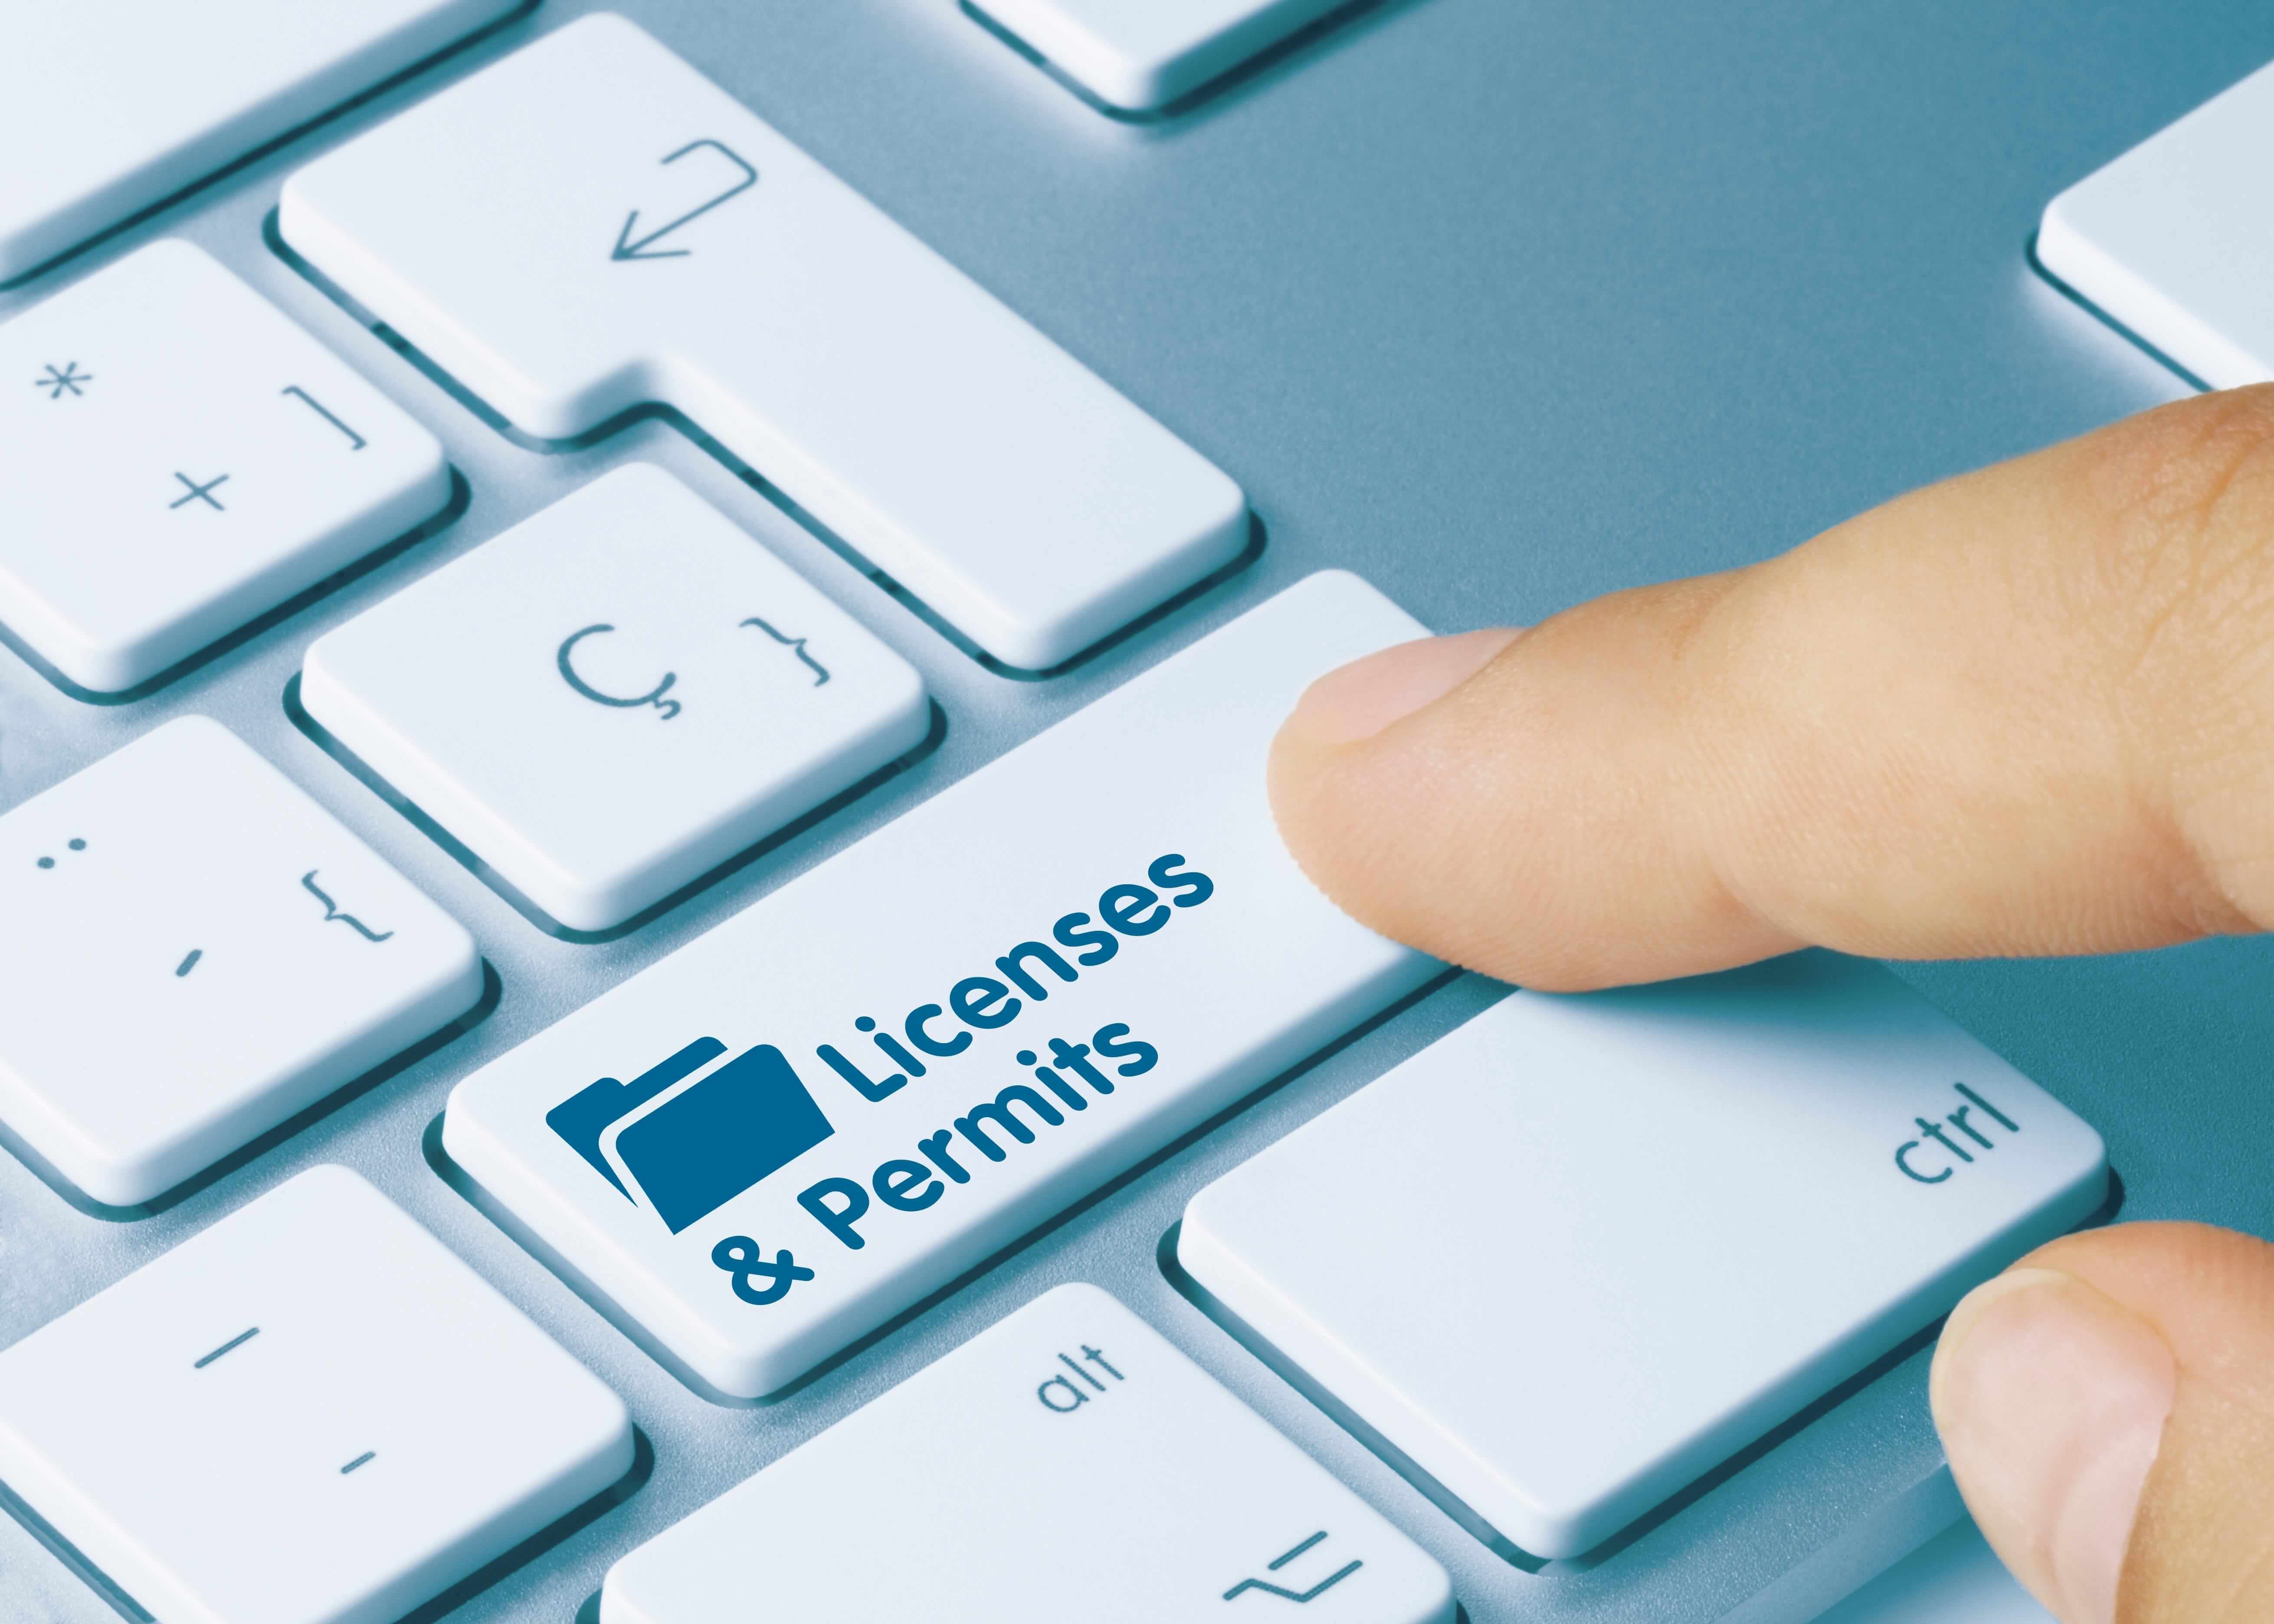 background checks for permits and licenses